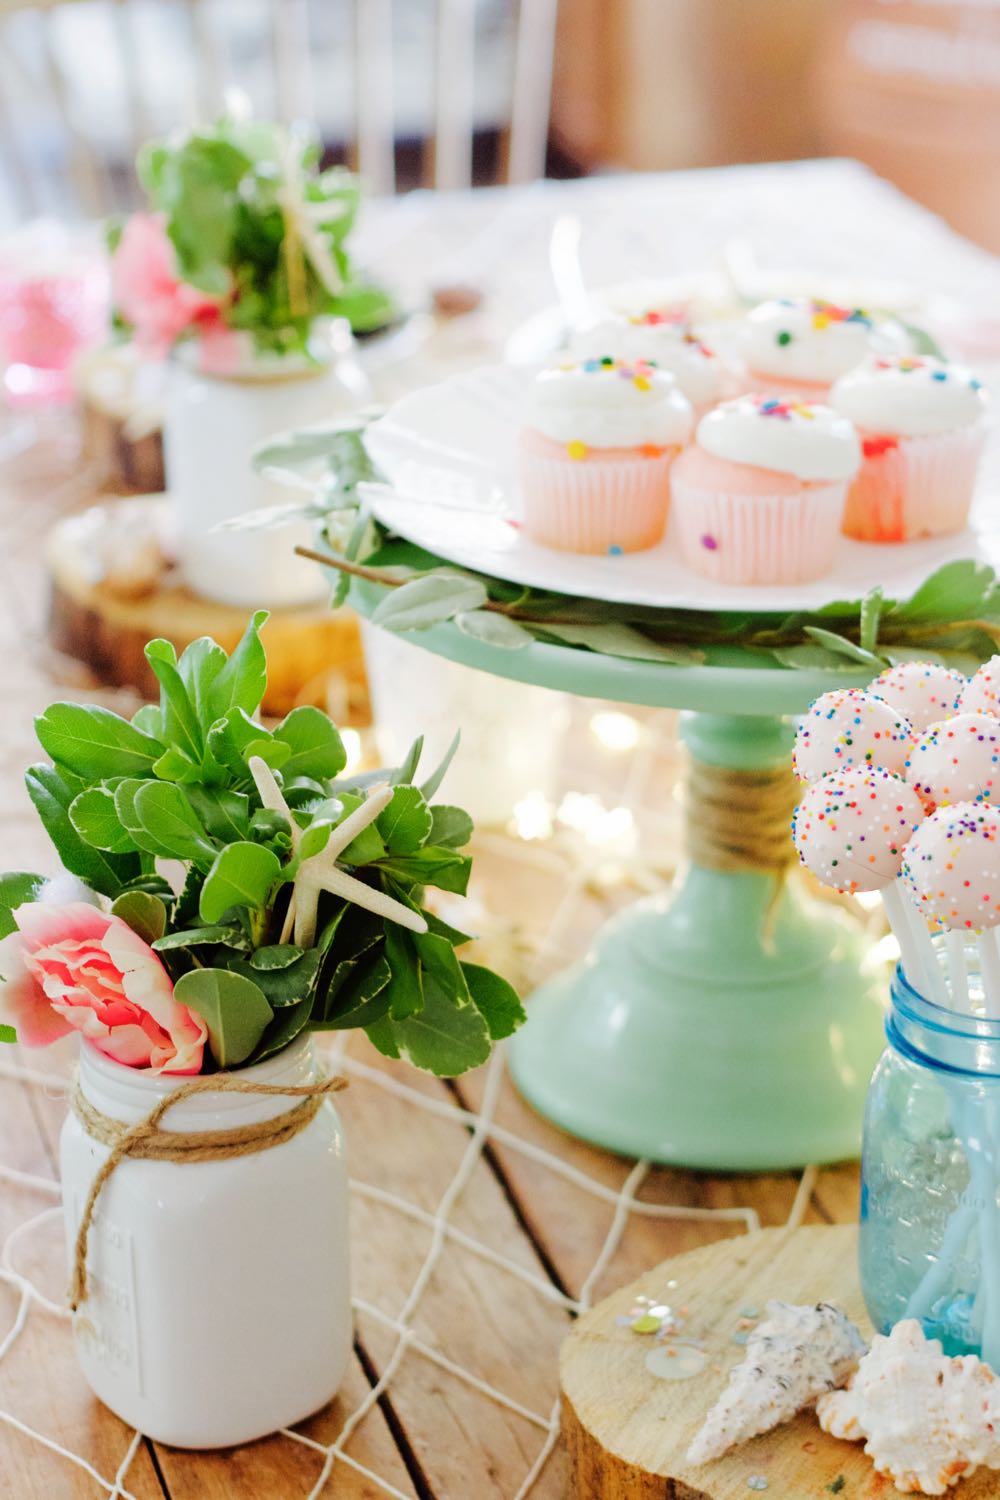 Mermaid Party Ideas For A Little Girl's Birthday - Ramshackle Glam